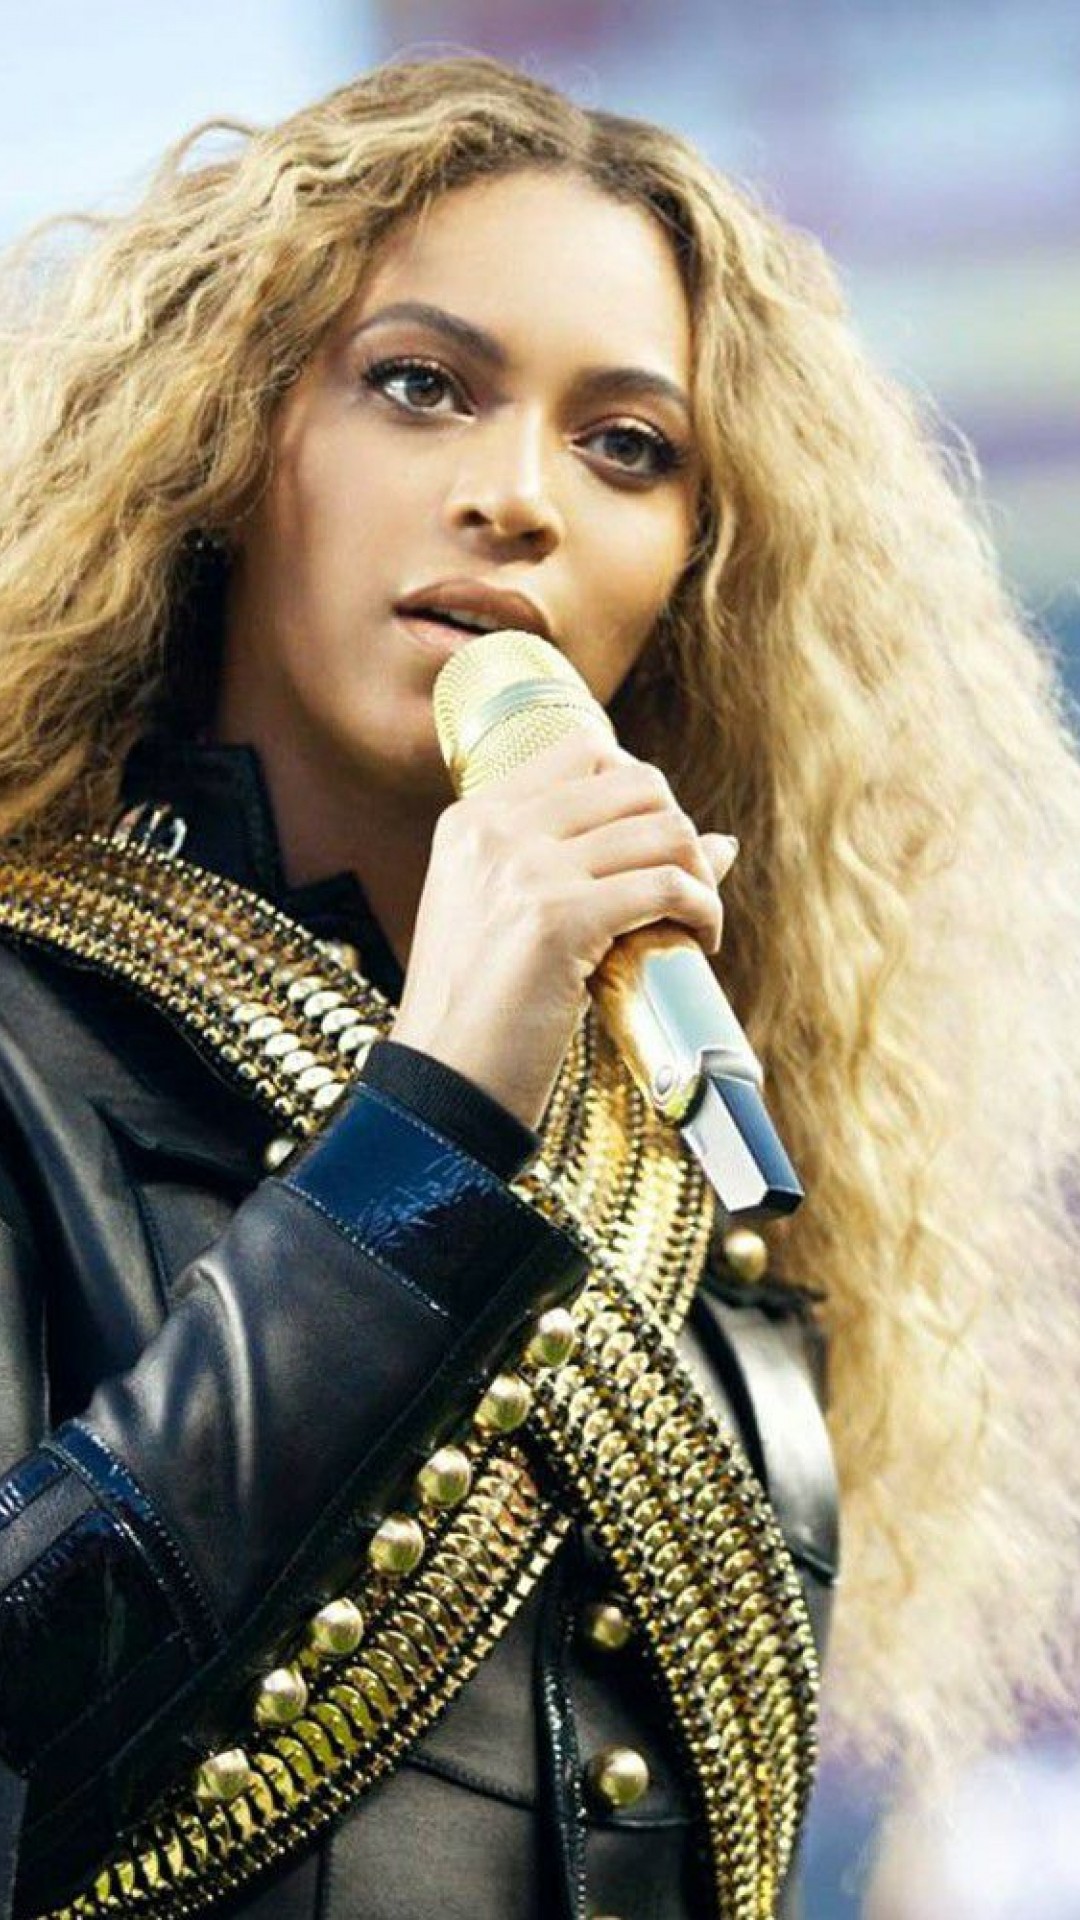 Beyonce Hd Images Iphone Wallpaper - Beyonce Iphone Wallpaper New , HD Wallpaper & Backgrounds